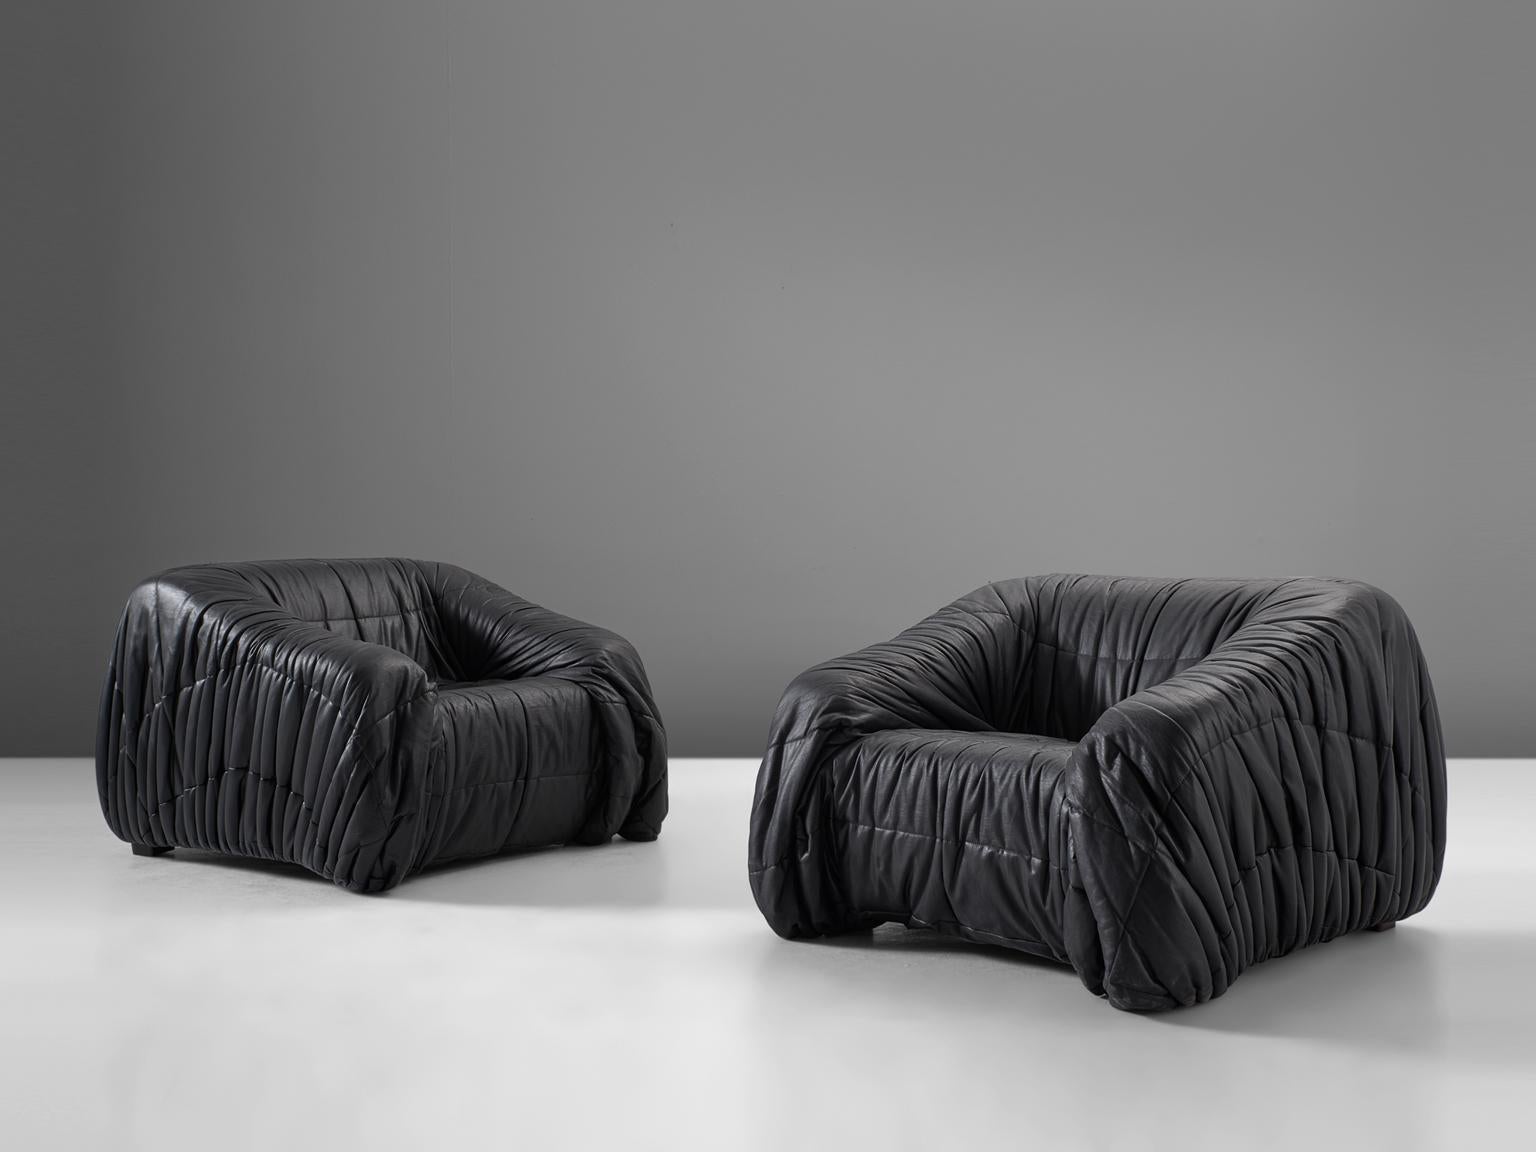 'Piumino' lounge chairs by Jonathan de Pas, Donato D'urbino & Paolo Lomazzi for Dell'Oca, Italy, 1970. 

These lounge chairs are completely moulded out of foam and covered with folded black, thick butter-soft leather. One of the mean traits of